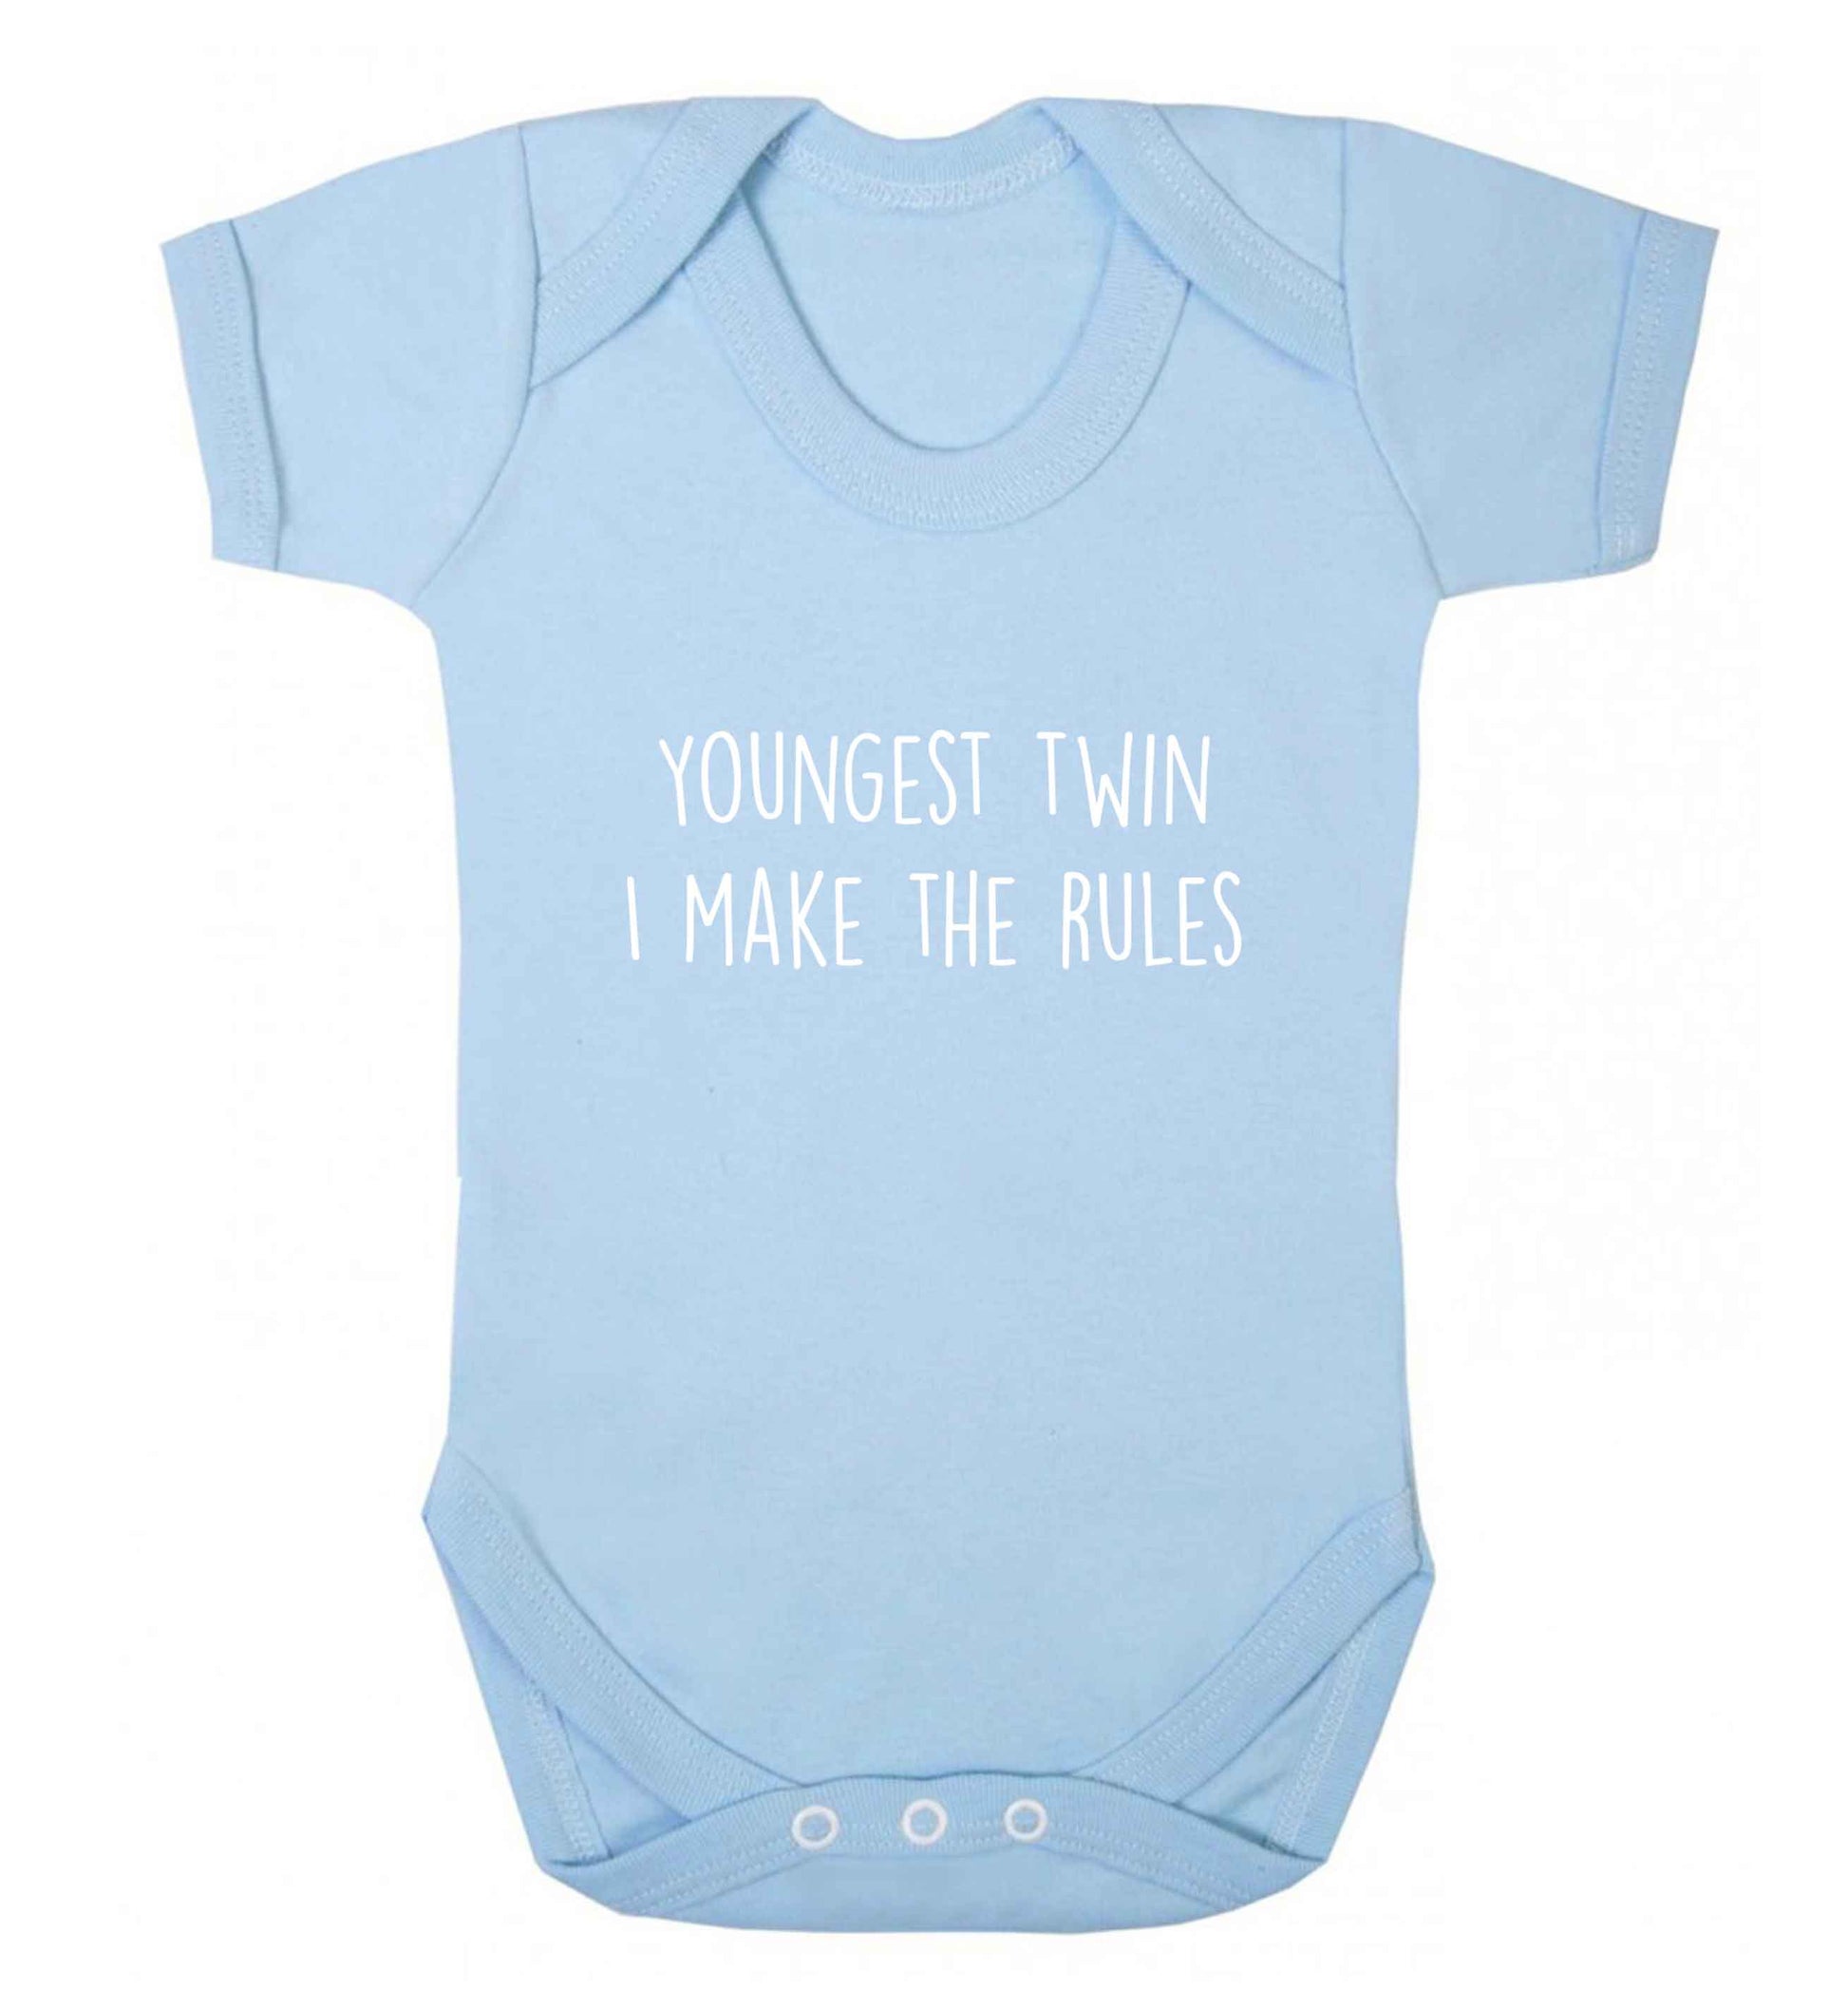 Youngest twin I make the rules baby vest pale blue 18-24 months